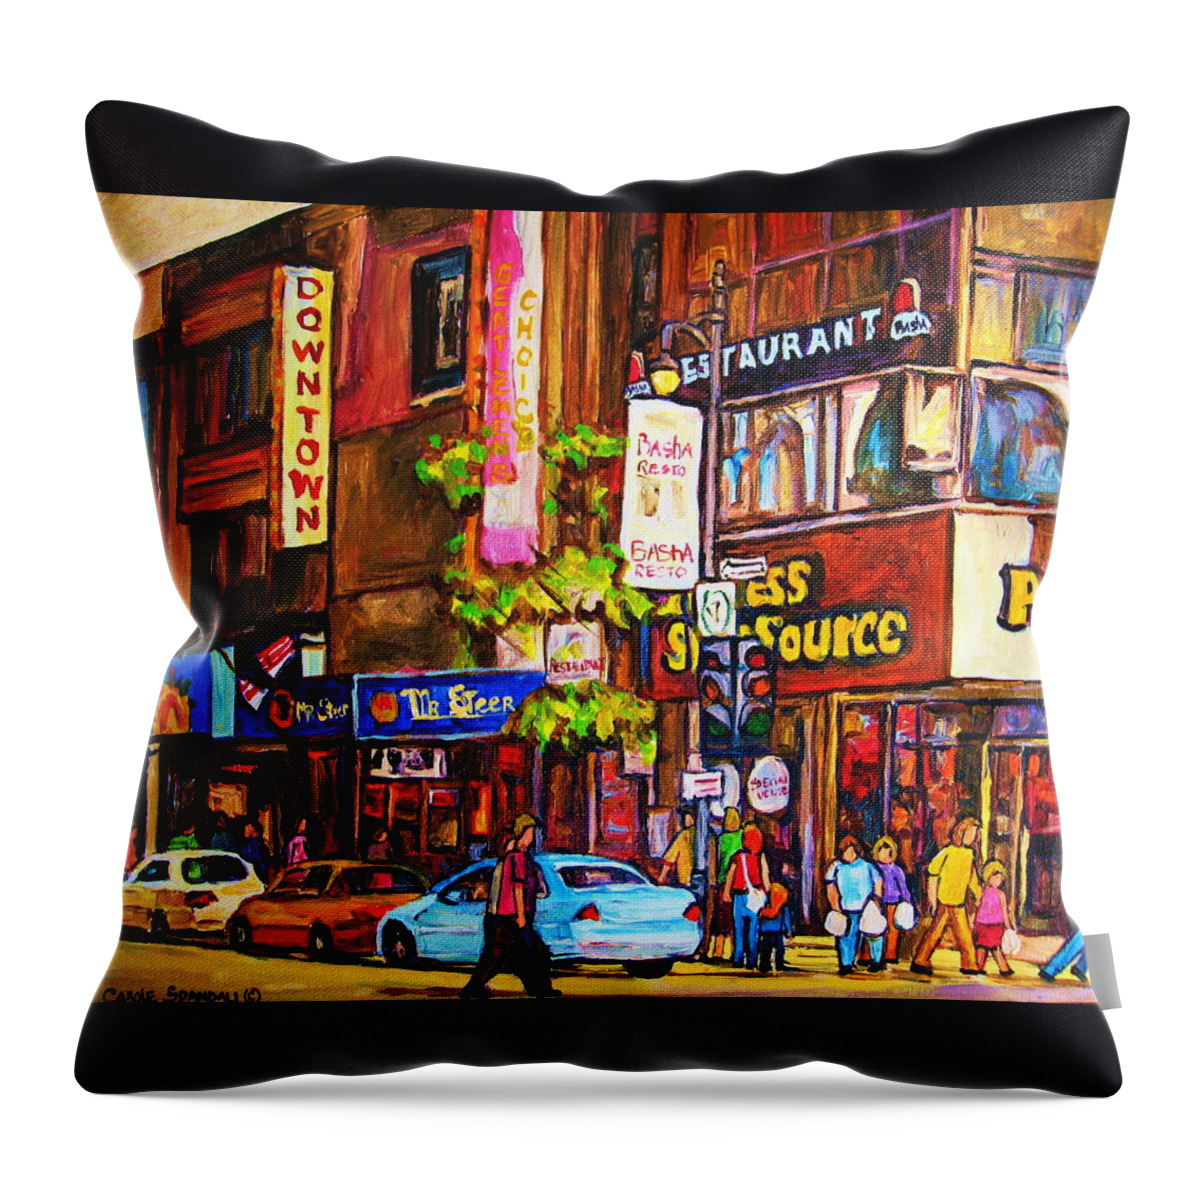 Cityscape Throw Pillow featuring the painting Busy Downtown Street by Carole Spandau